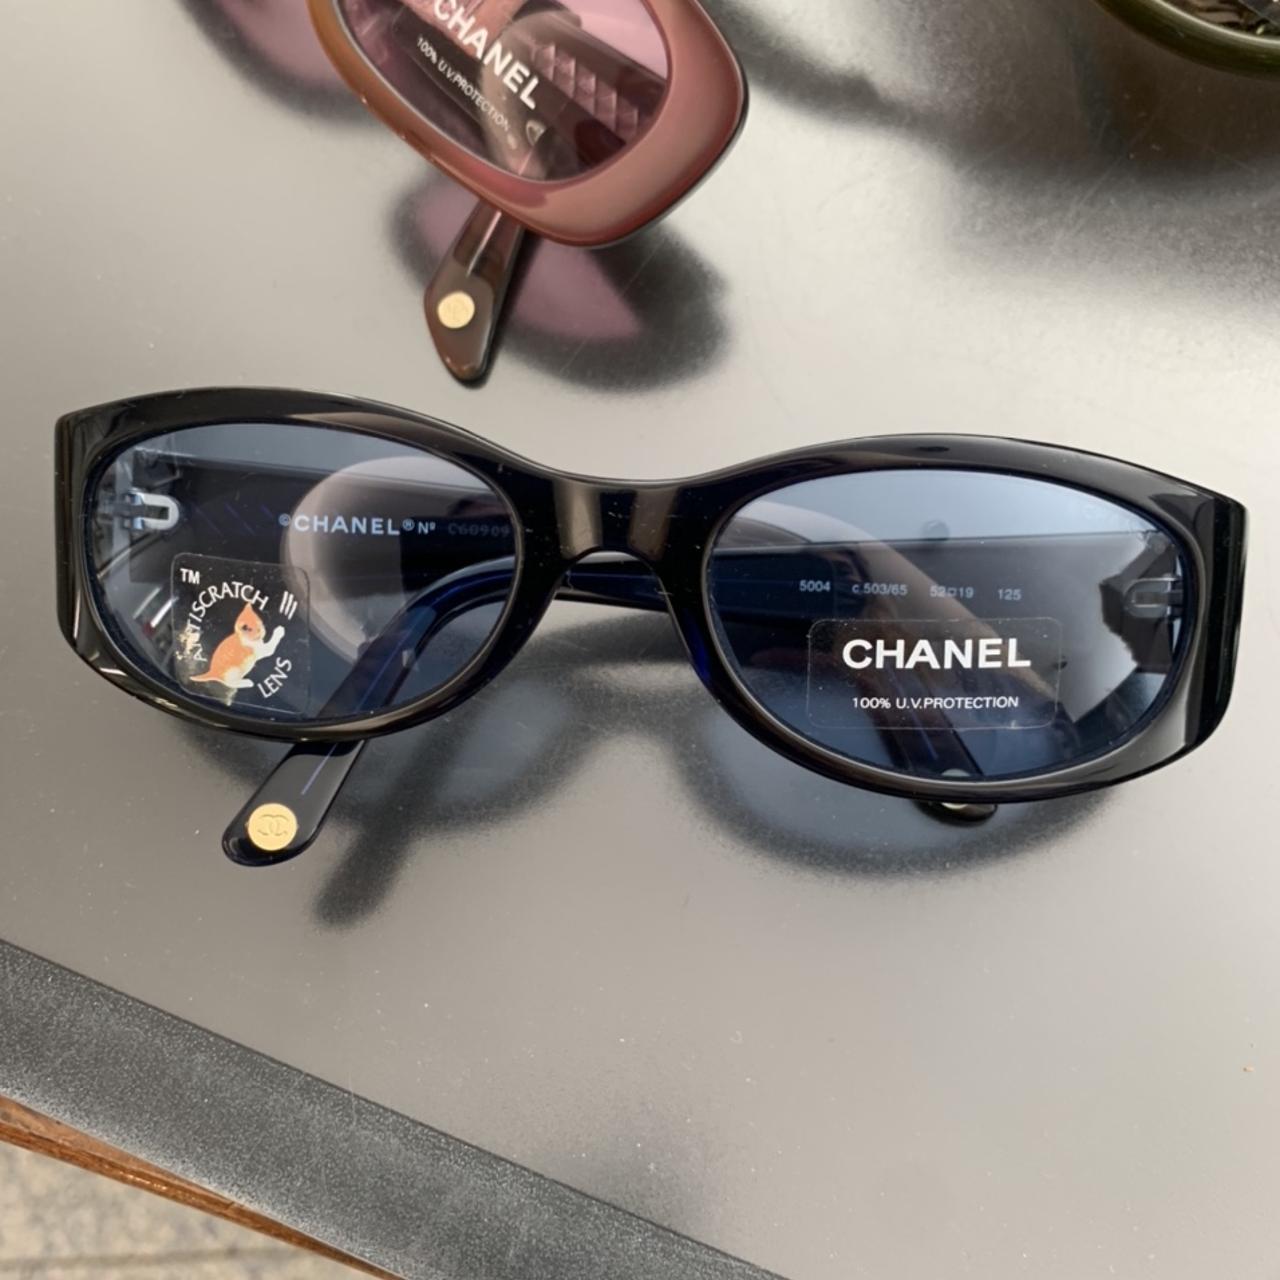 CHANEL vintage sunglasses ✨, Brand new✨, Comes with